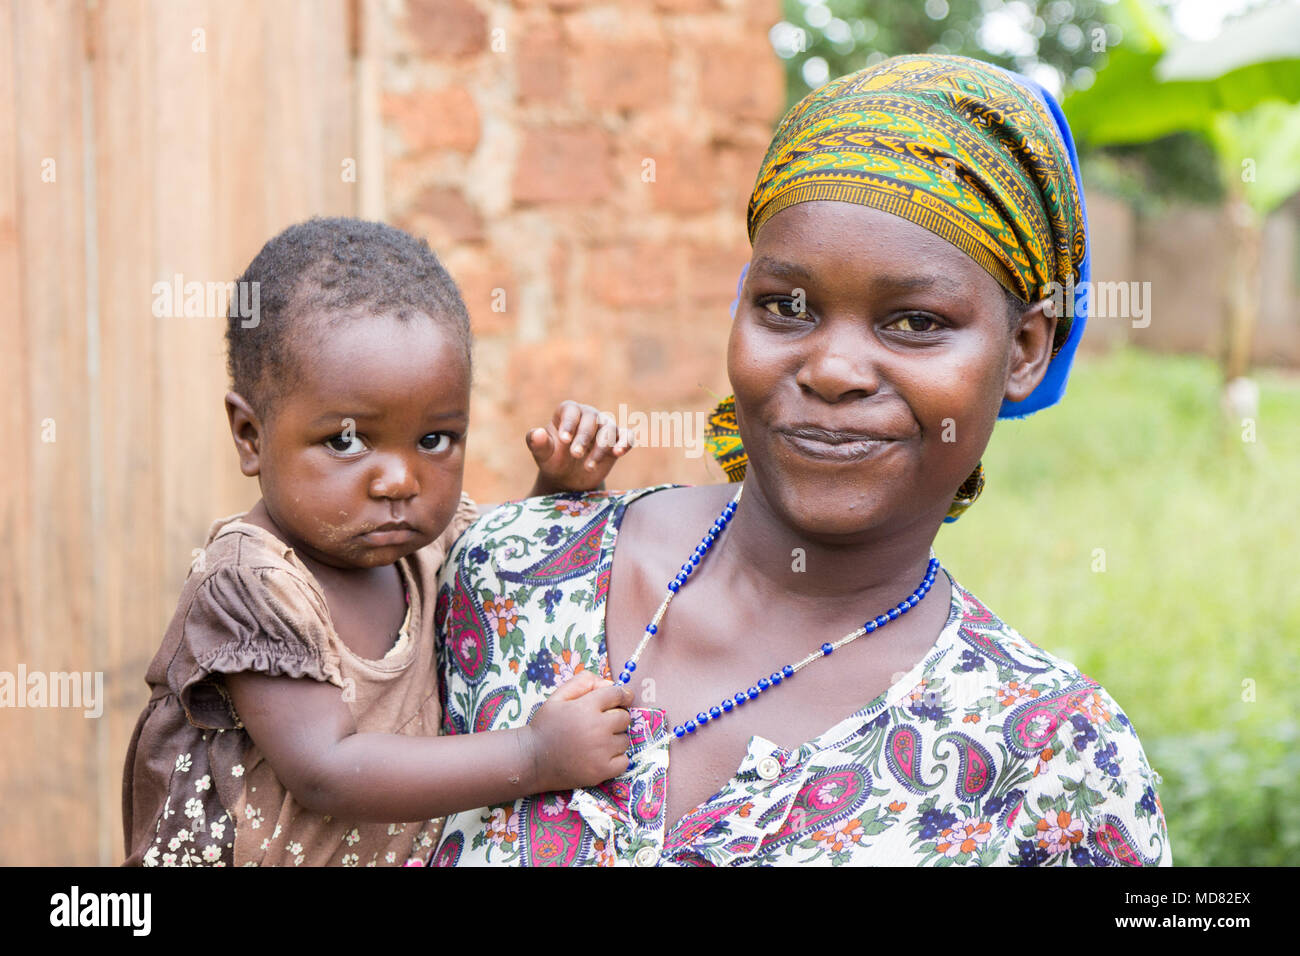 Uganda. June 09 2017. A happy and smiling young African woman holding her child in her arms. Stock Photo